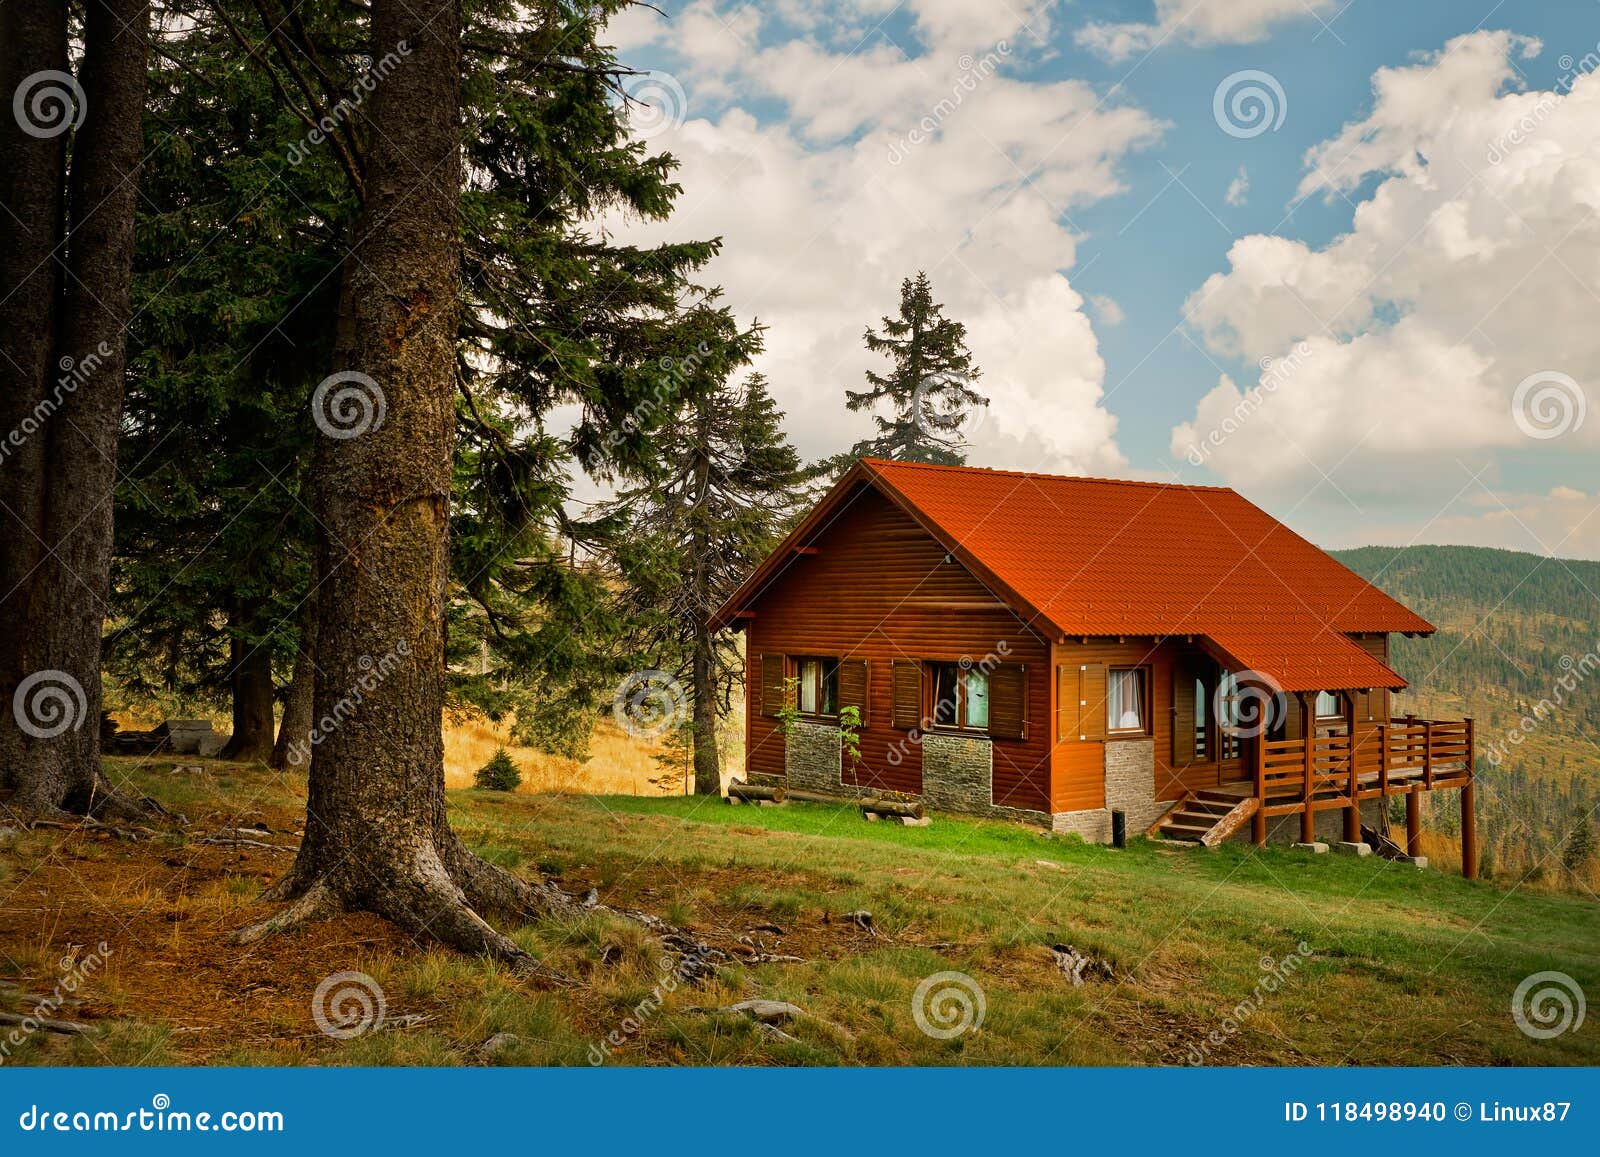 Put away clothes Spit Creep Cabin in Mountain stock photo. Image of europe, european - 118498940